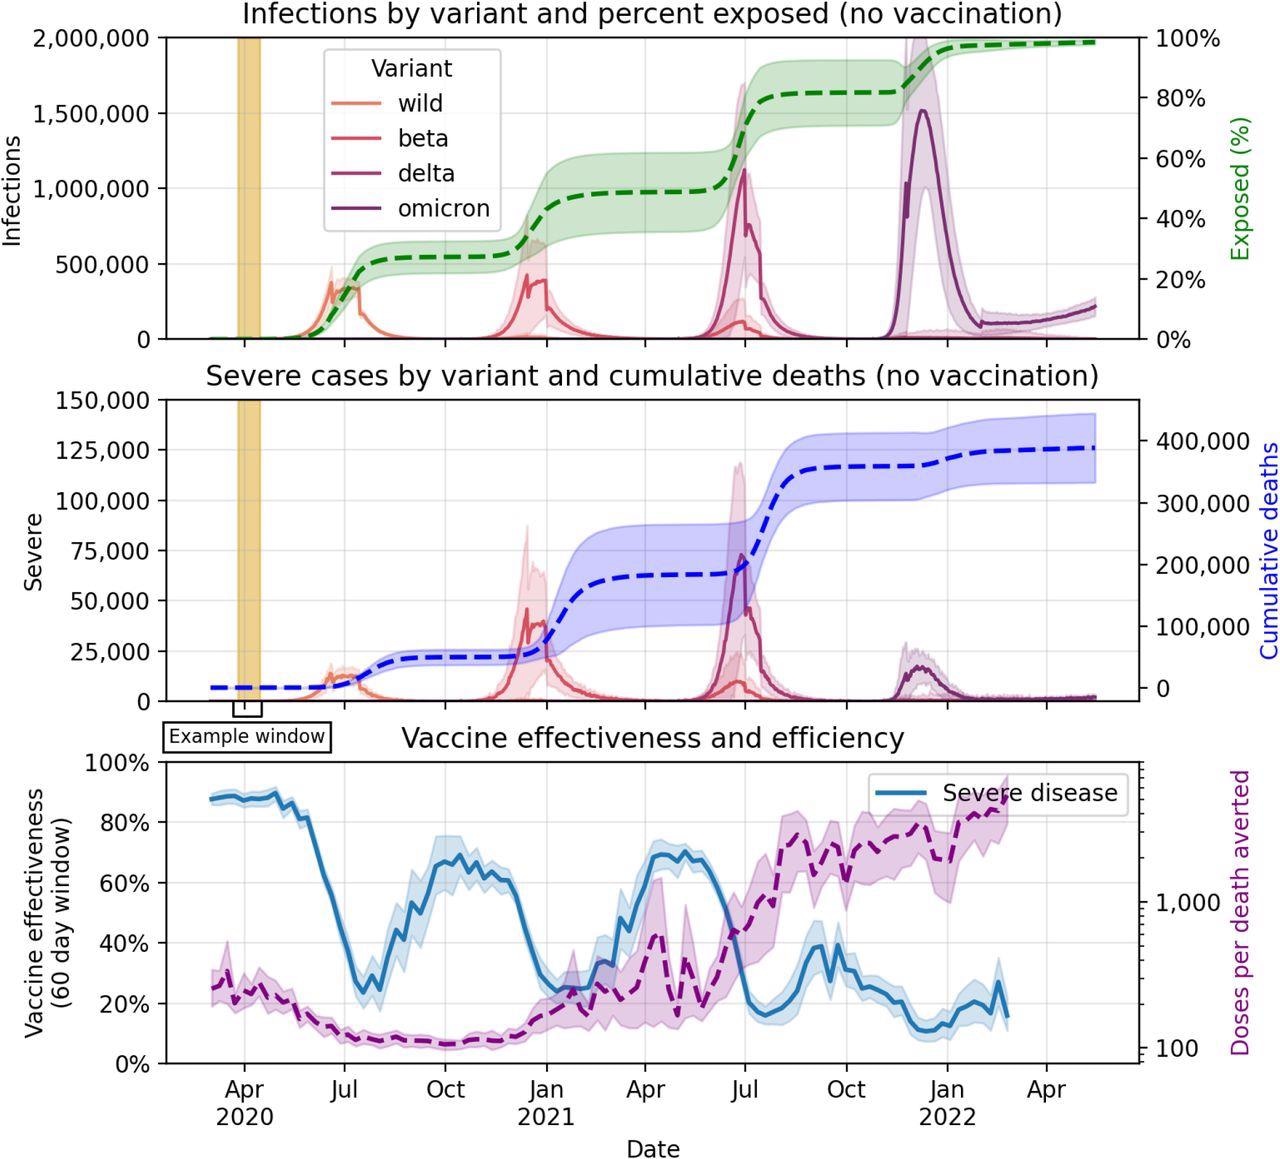 Population-level vaccine effectiveness as a function of time. The top two panels show new infections and new severe cases by variant, percent of the population with prior infection, and cumulative deaths in the absence of vaccination. The last panel shows vaccine effectiveness against severe disease over time, which is calculated for the 60 days following vaccine completion (i.e., after the second dose) and doses per death averted over time, which is calculated for the cumulative deaths following each vaccine day for the remainder of the simulated period. The golden rectangle represents an example vaccine effectiveness window. Simulations are for a South Africa-like population of 54 million people.